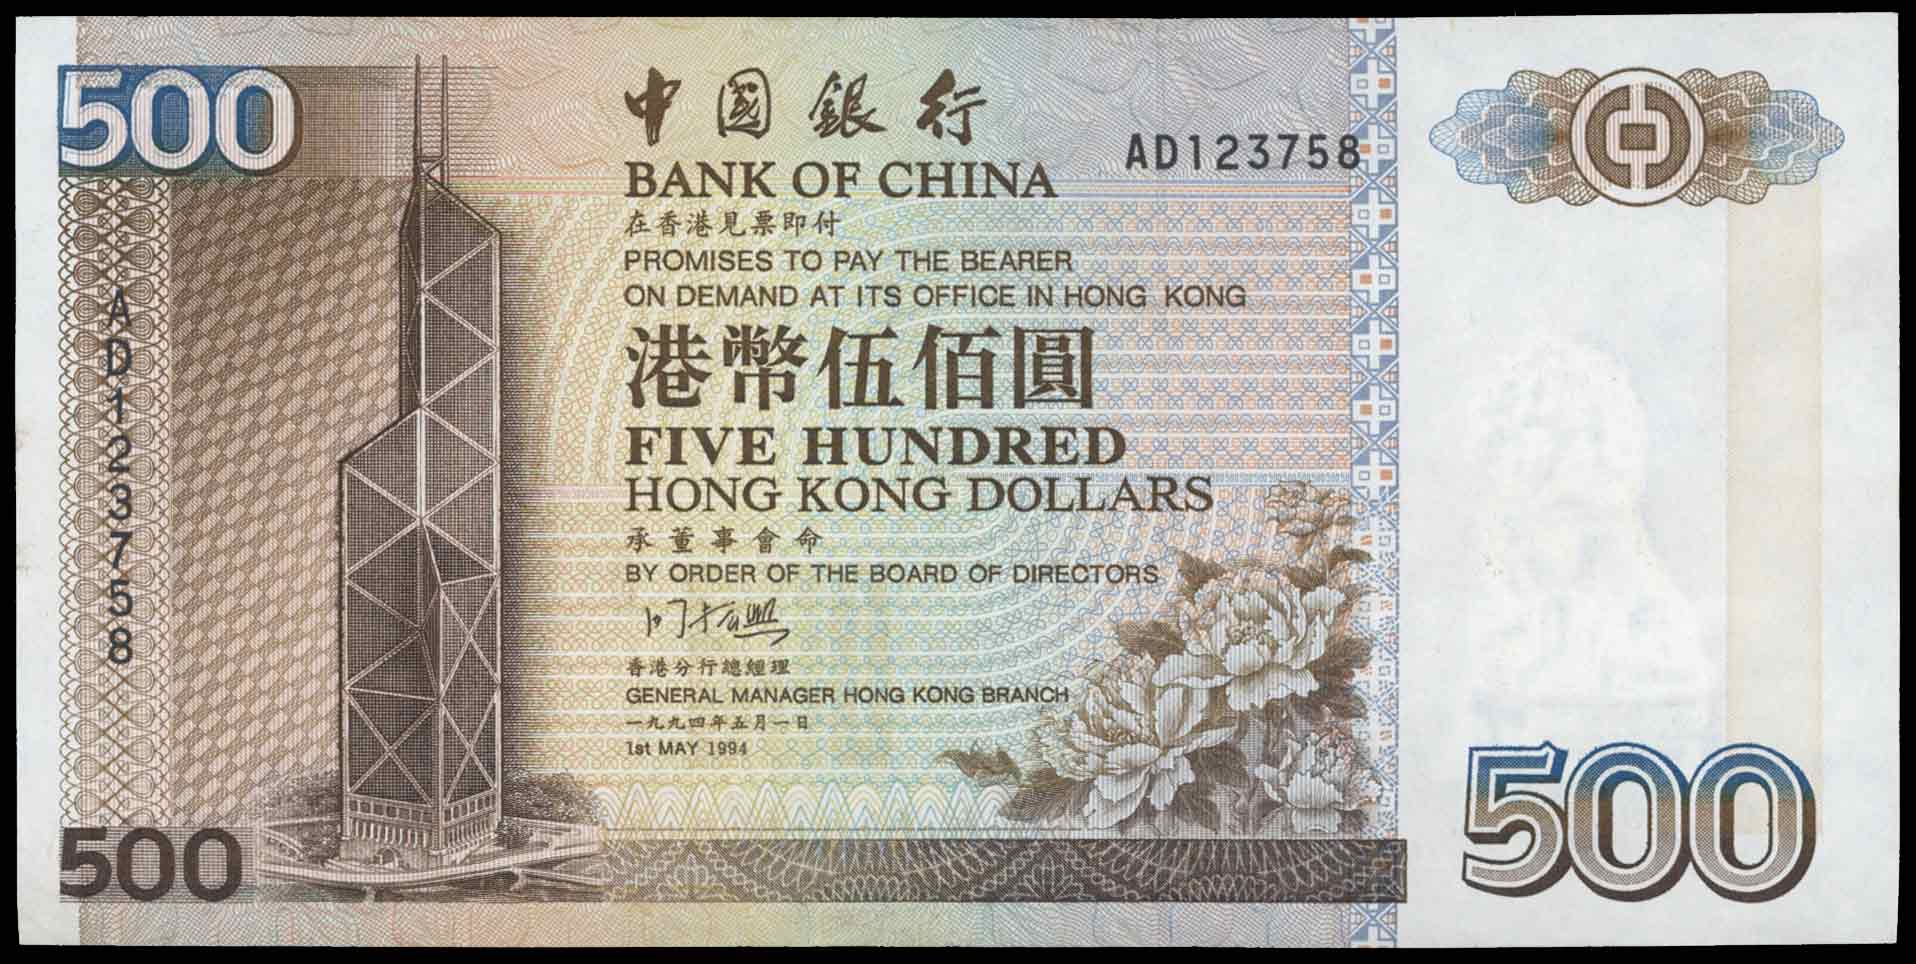 John Bull Stamp Auctions China, Asia & Worldwide Coins and